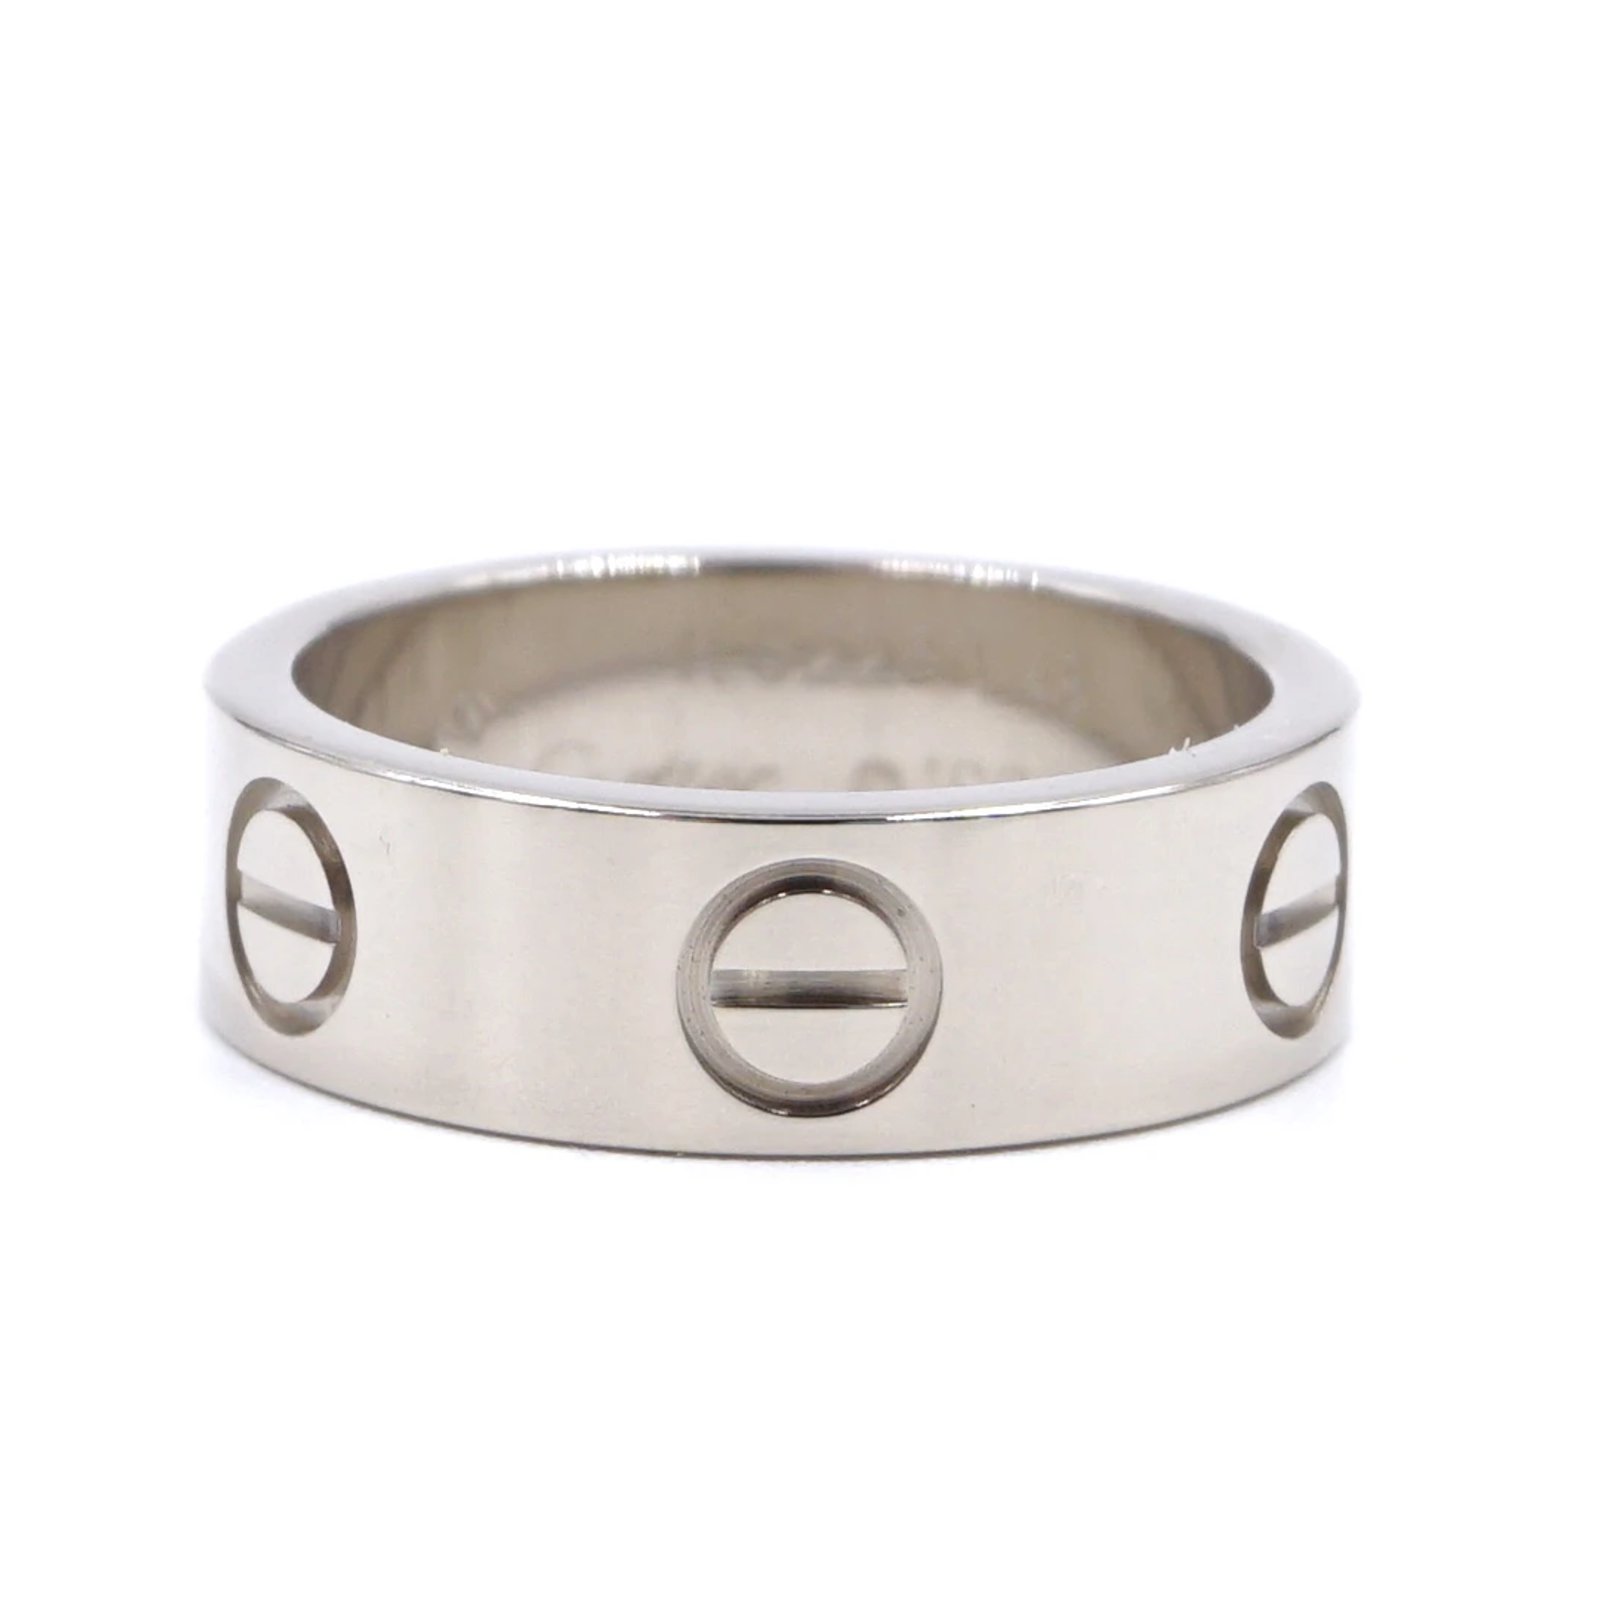 cartier ring 750 48